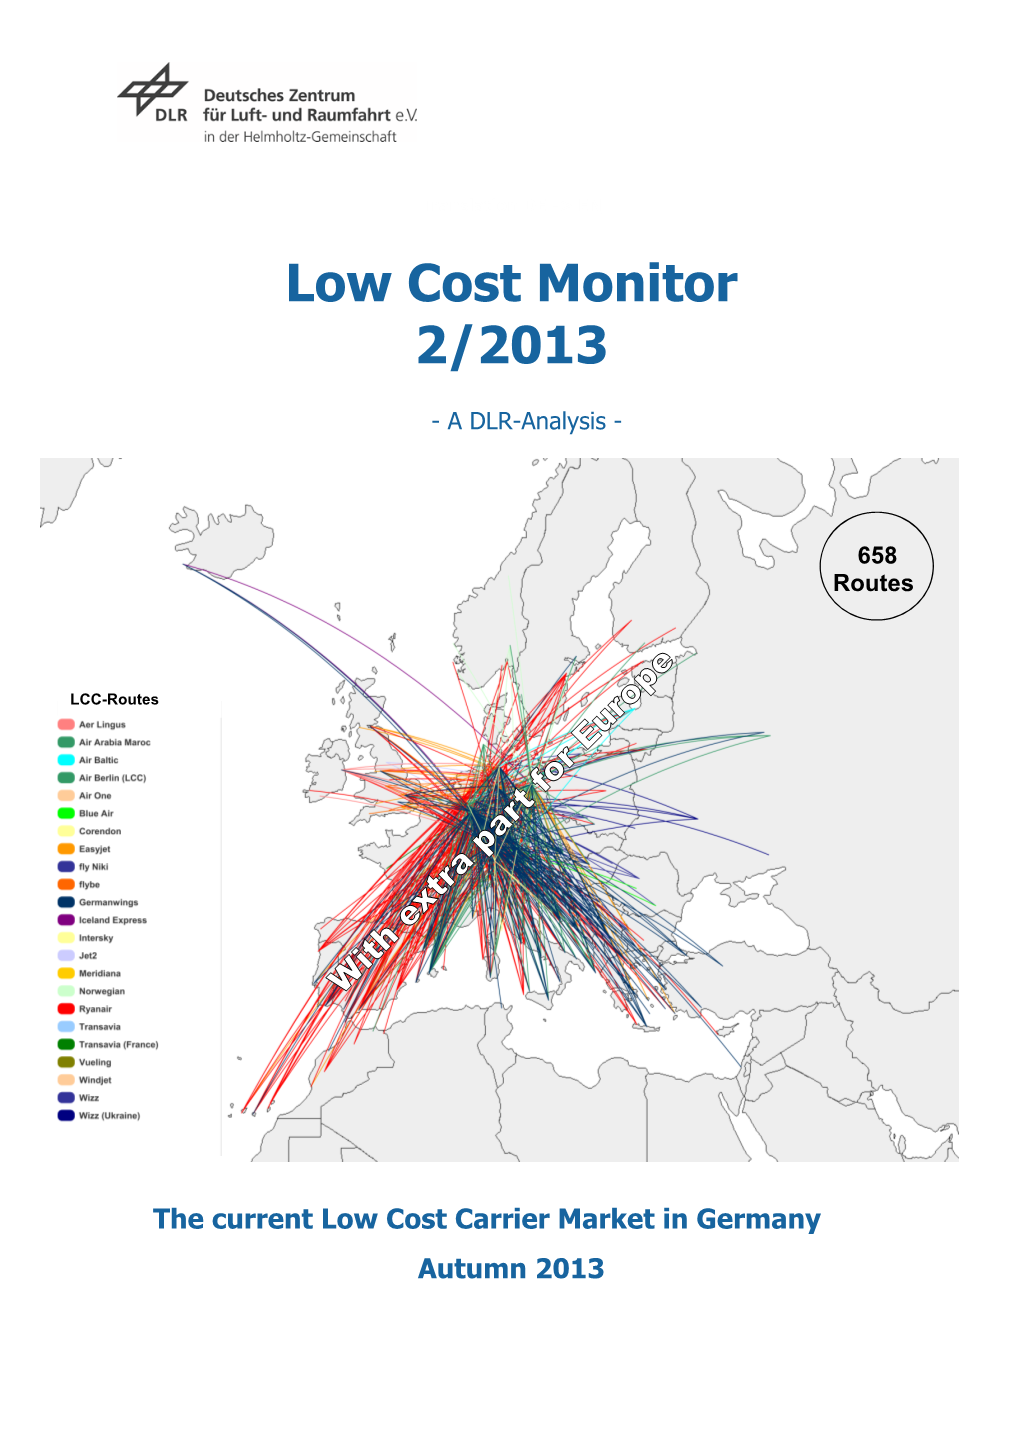 Low Cost Monitor 2/2013